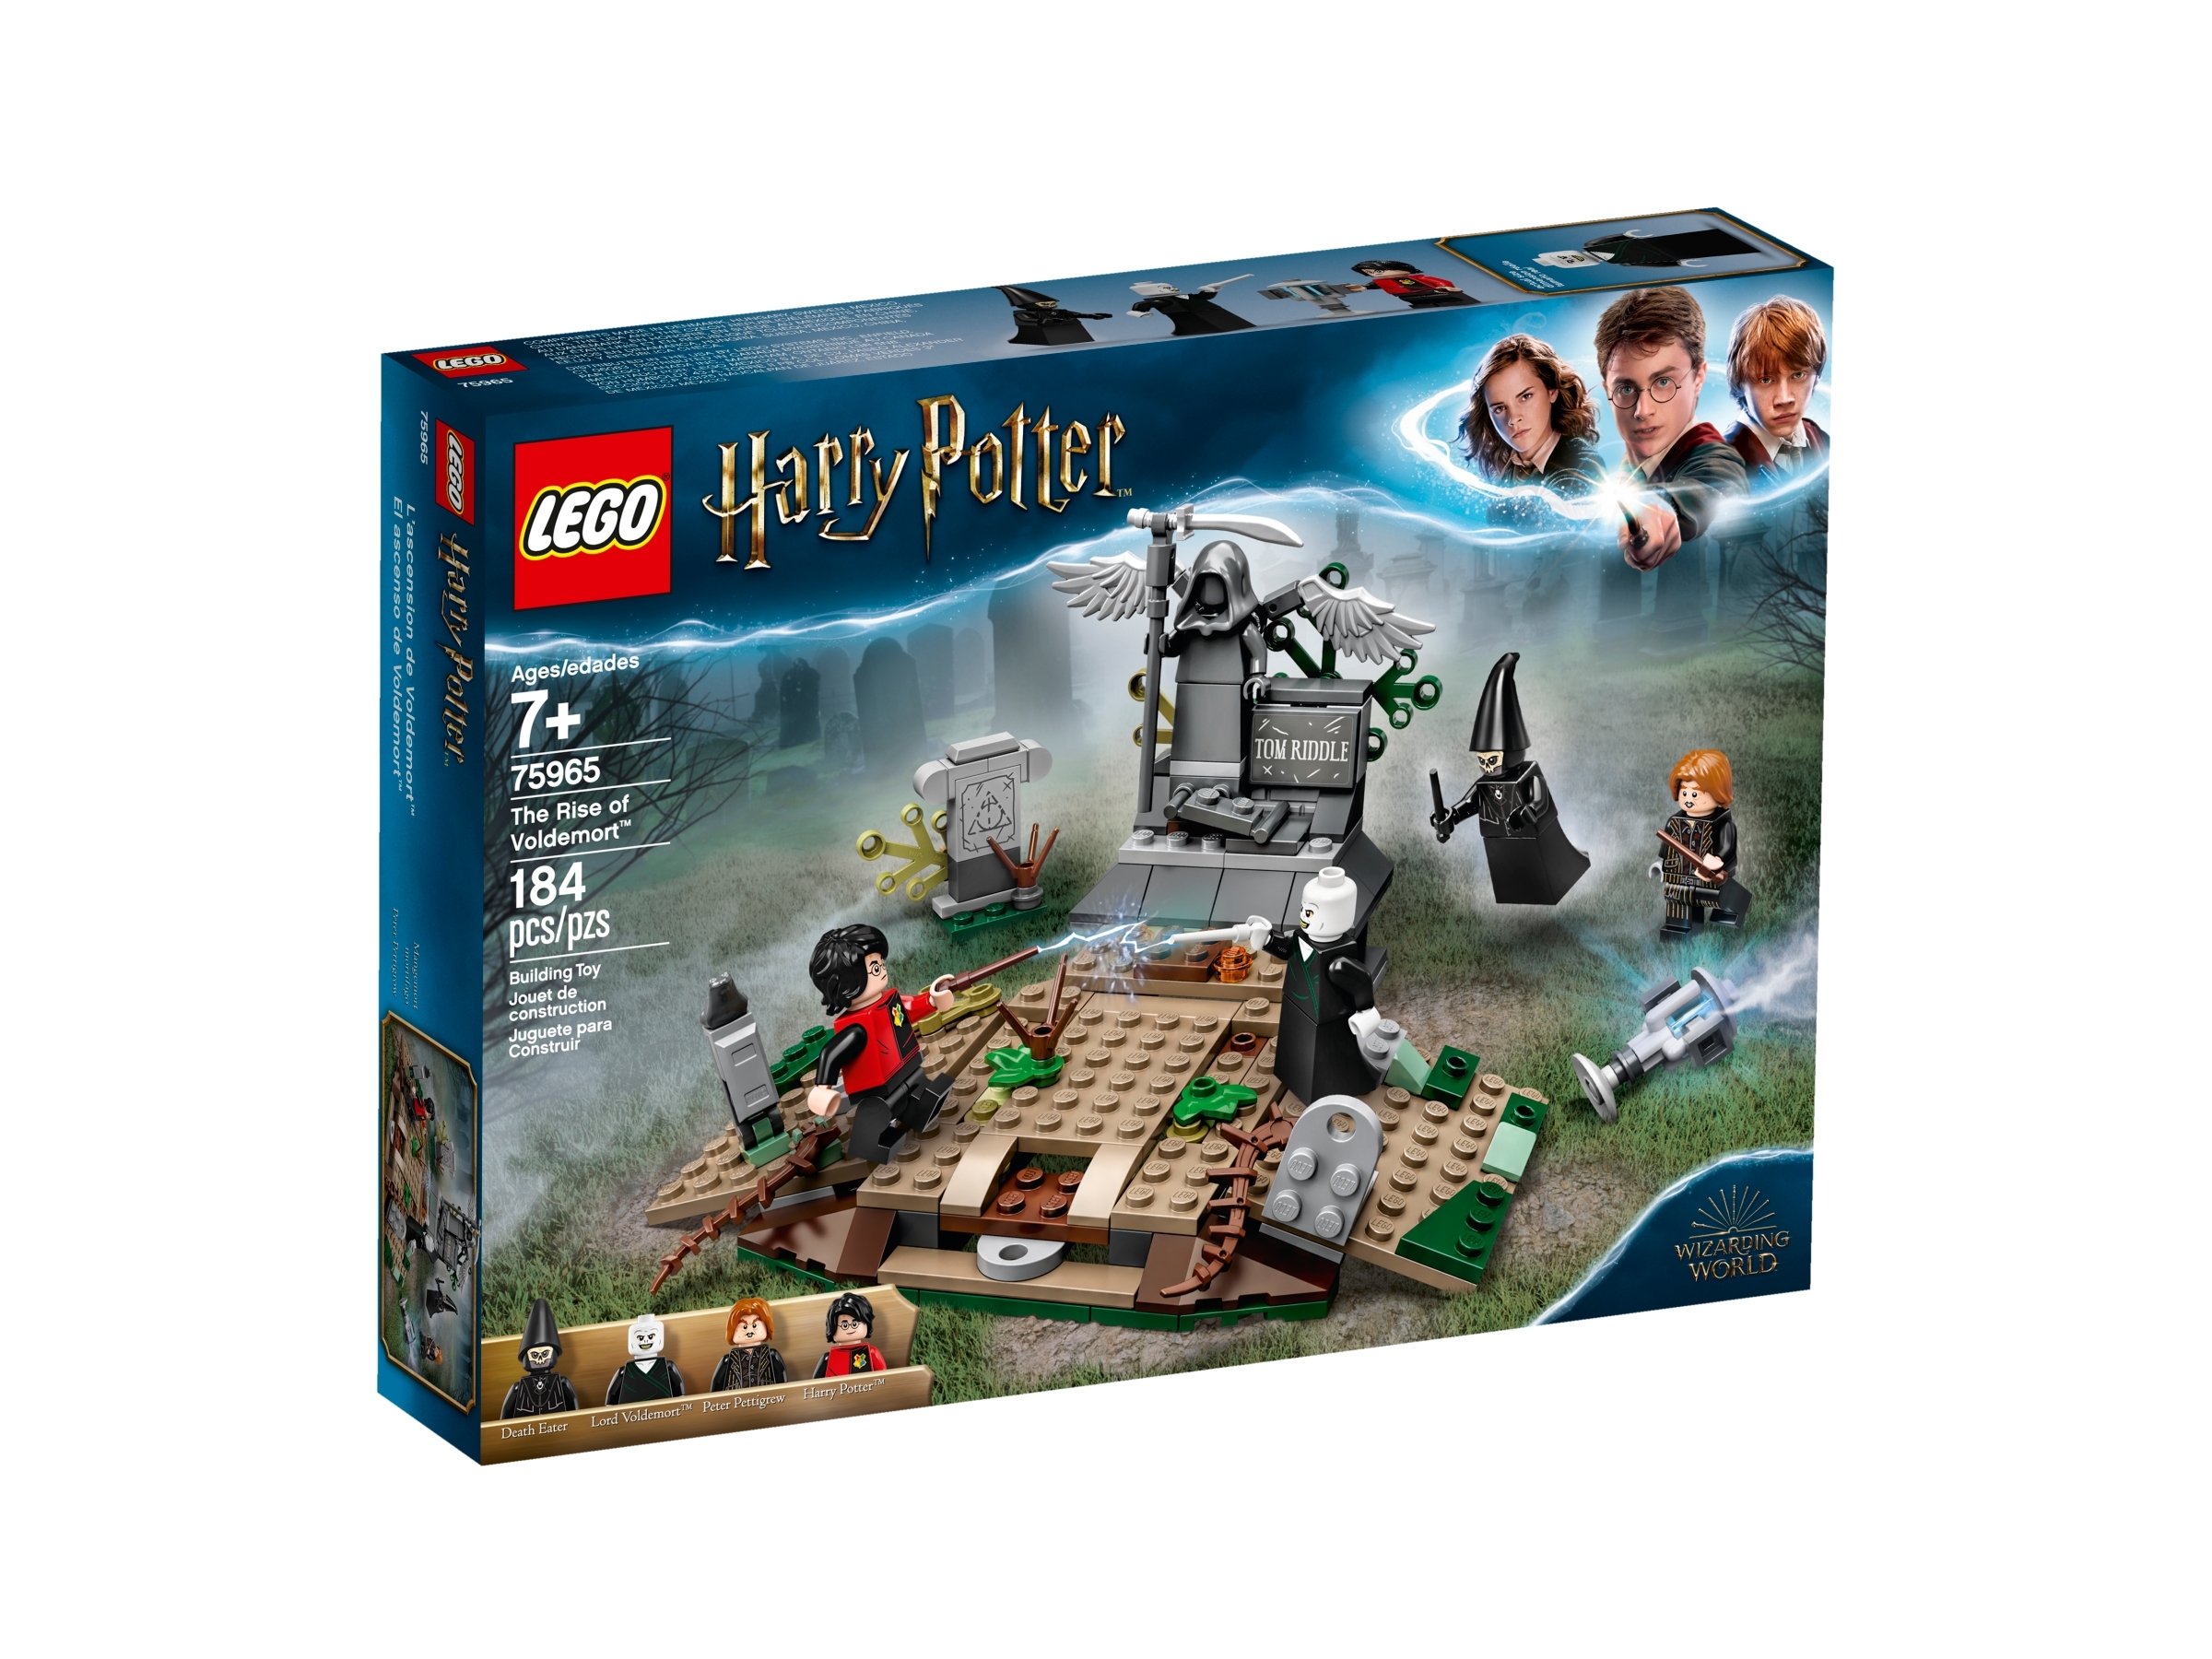 hp195 NEW LEGO Harry Potter  FROM SET 75965 HARRY POTTER 